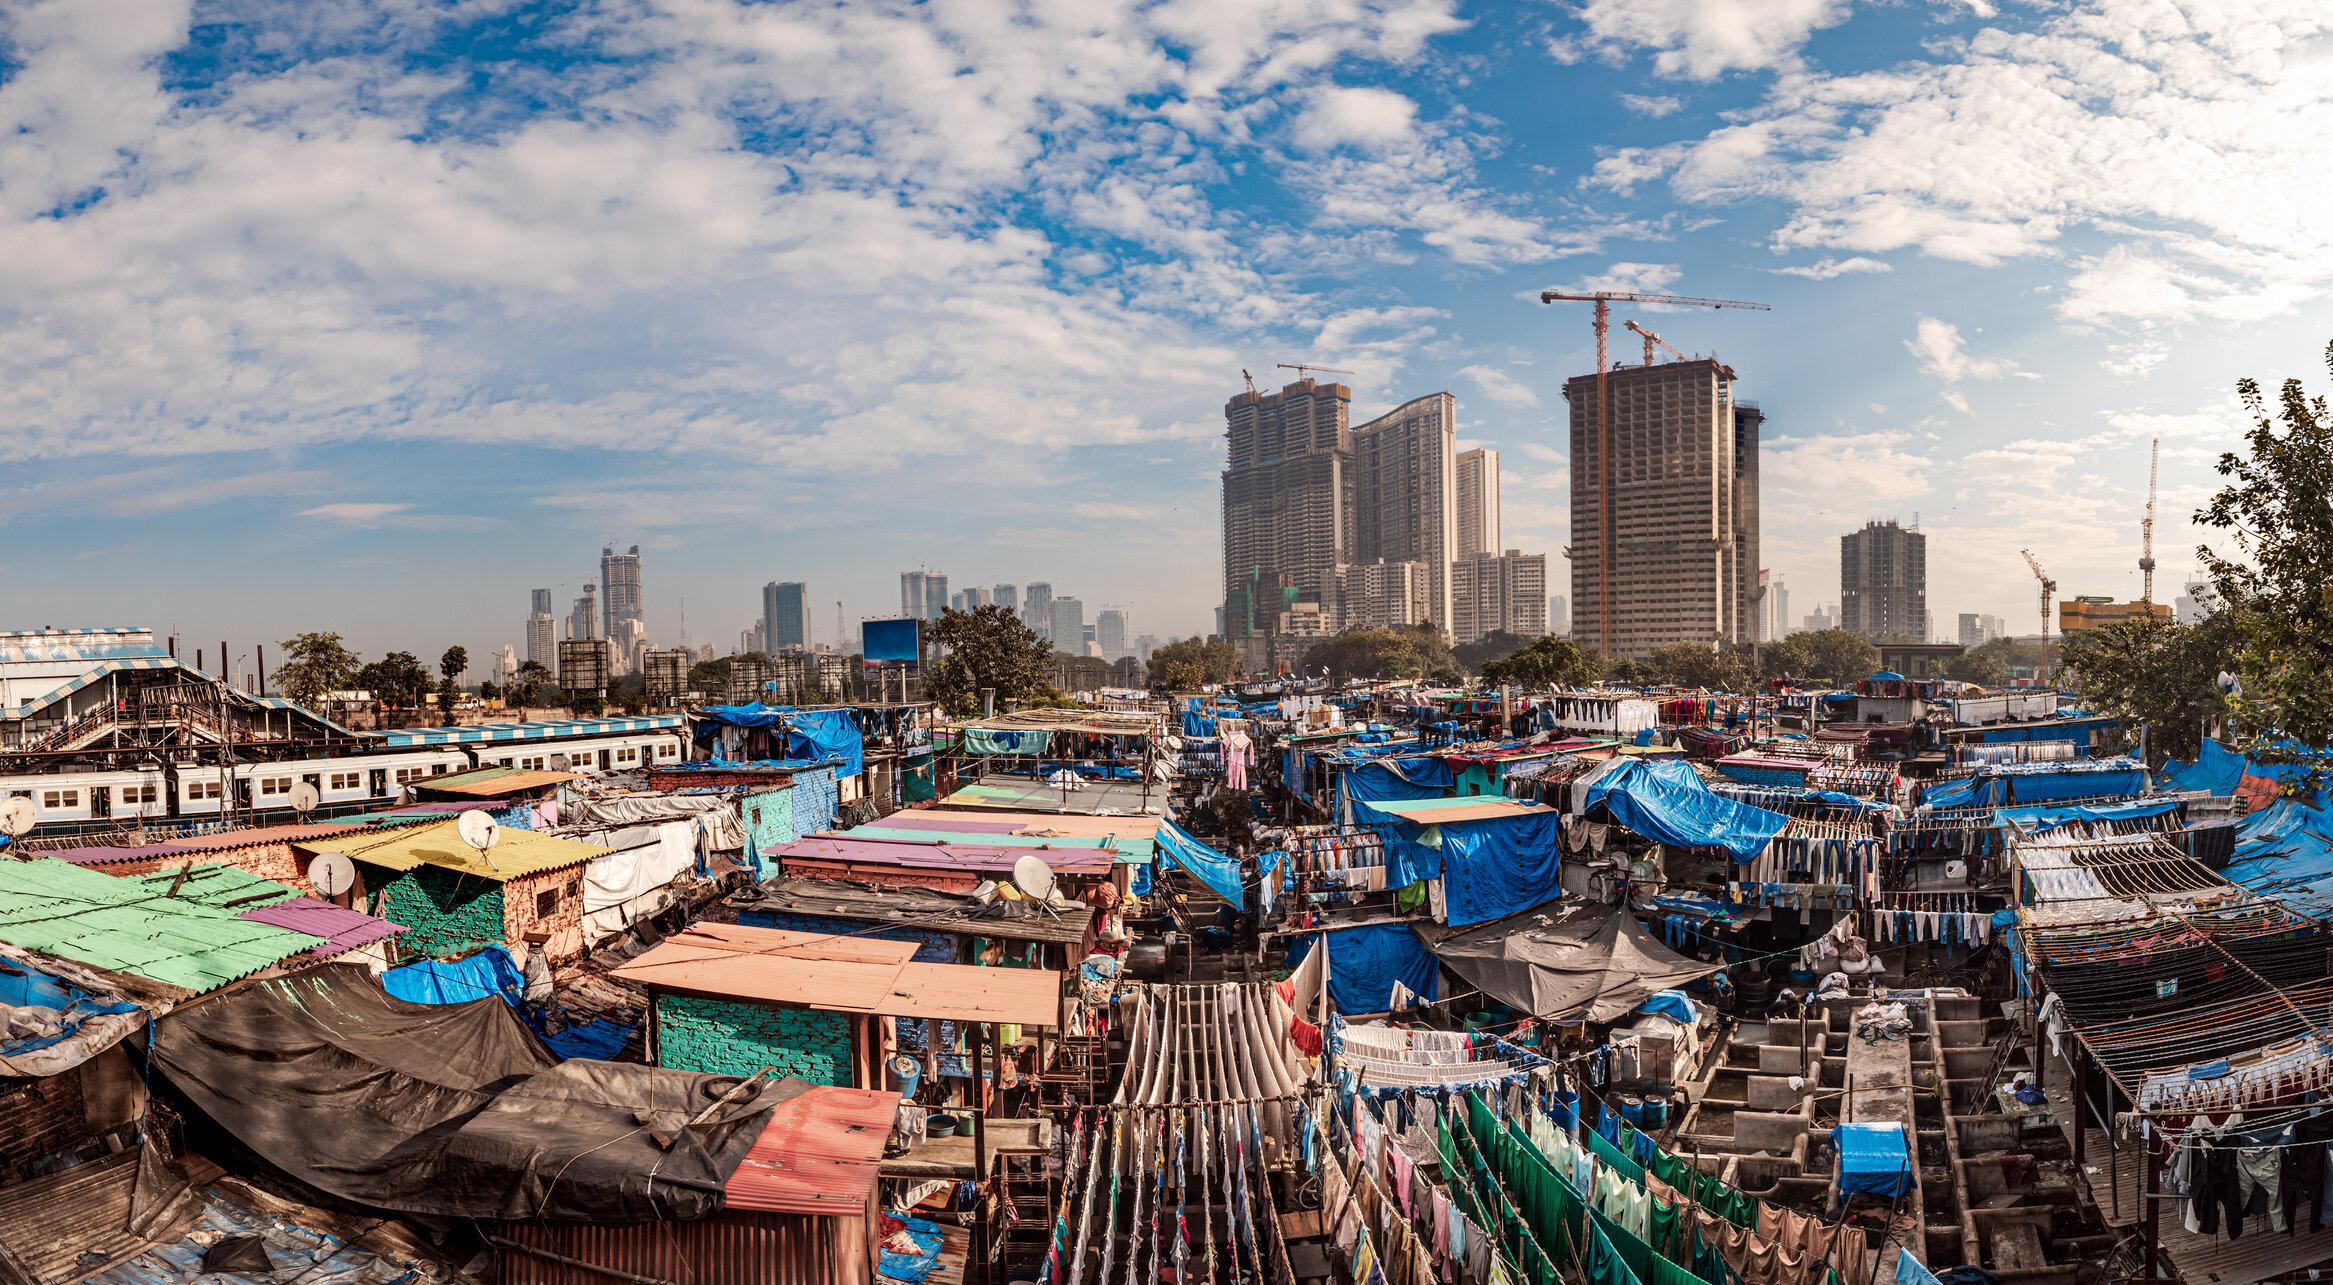 Slums can provide lessons for building effective circular cities